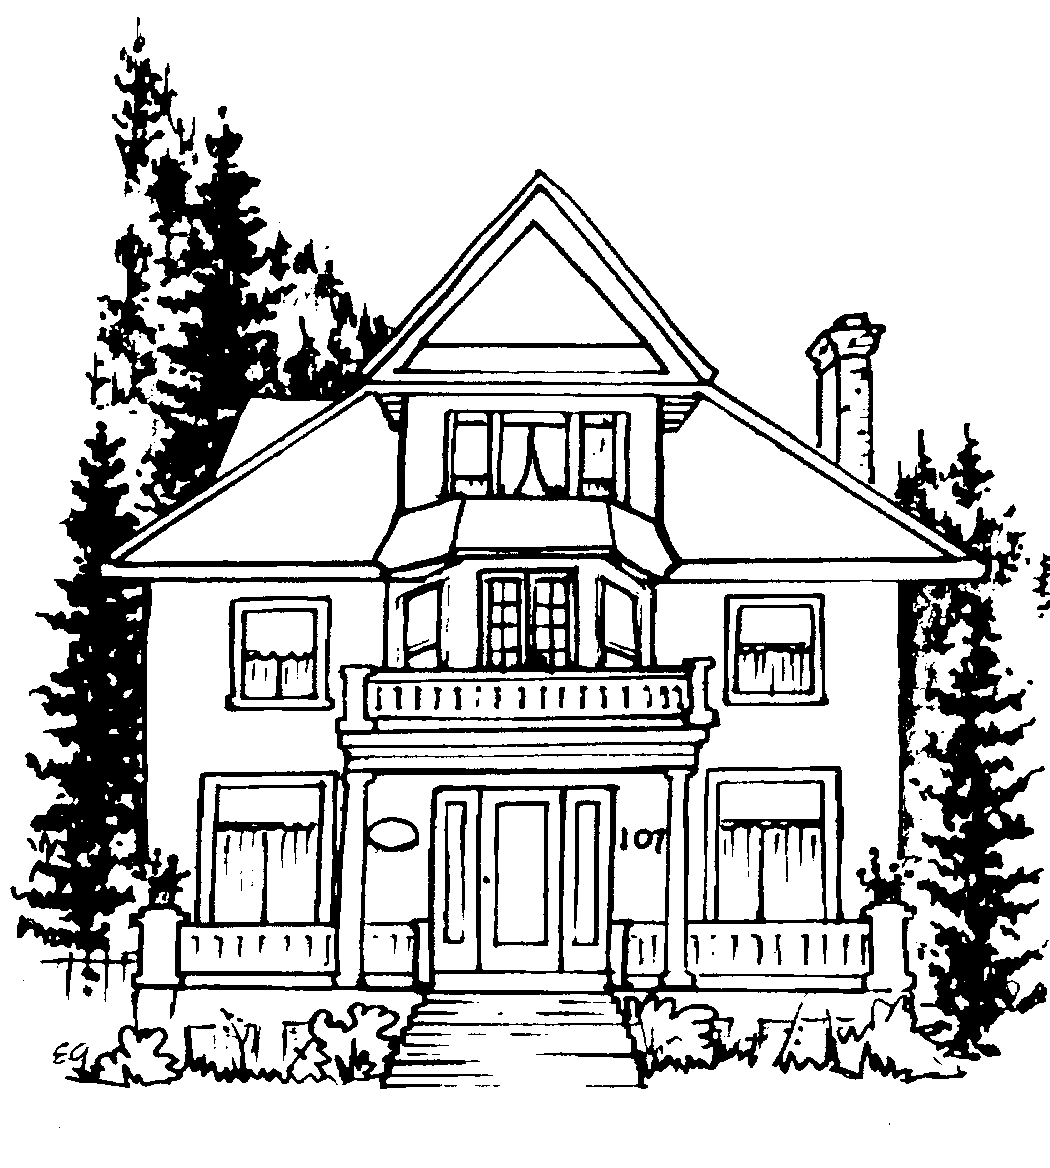 The beale bed breakfast. Clipart house mid century